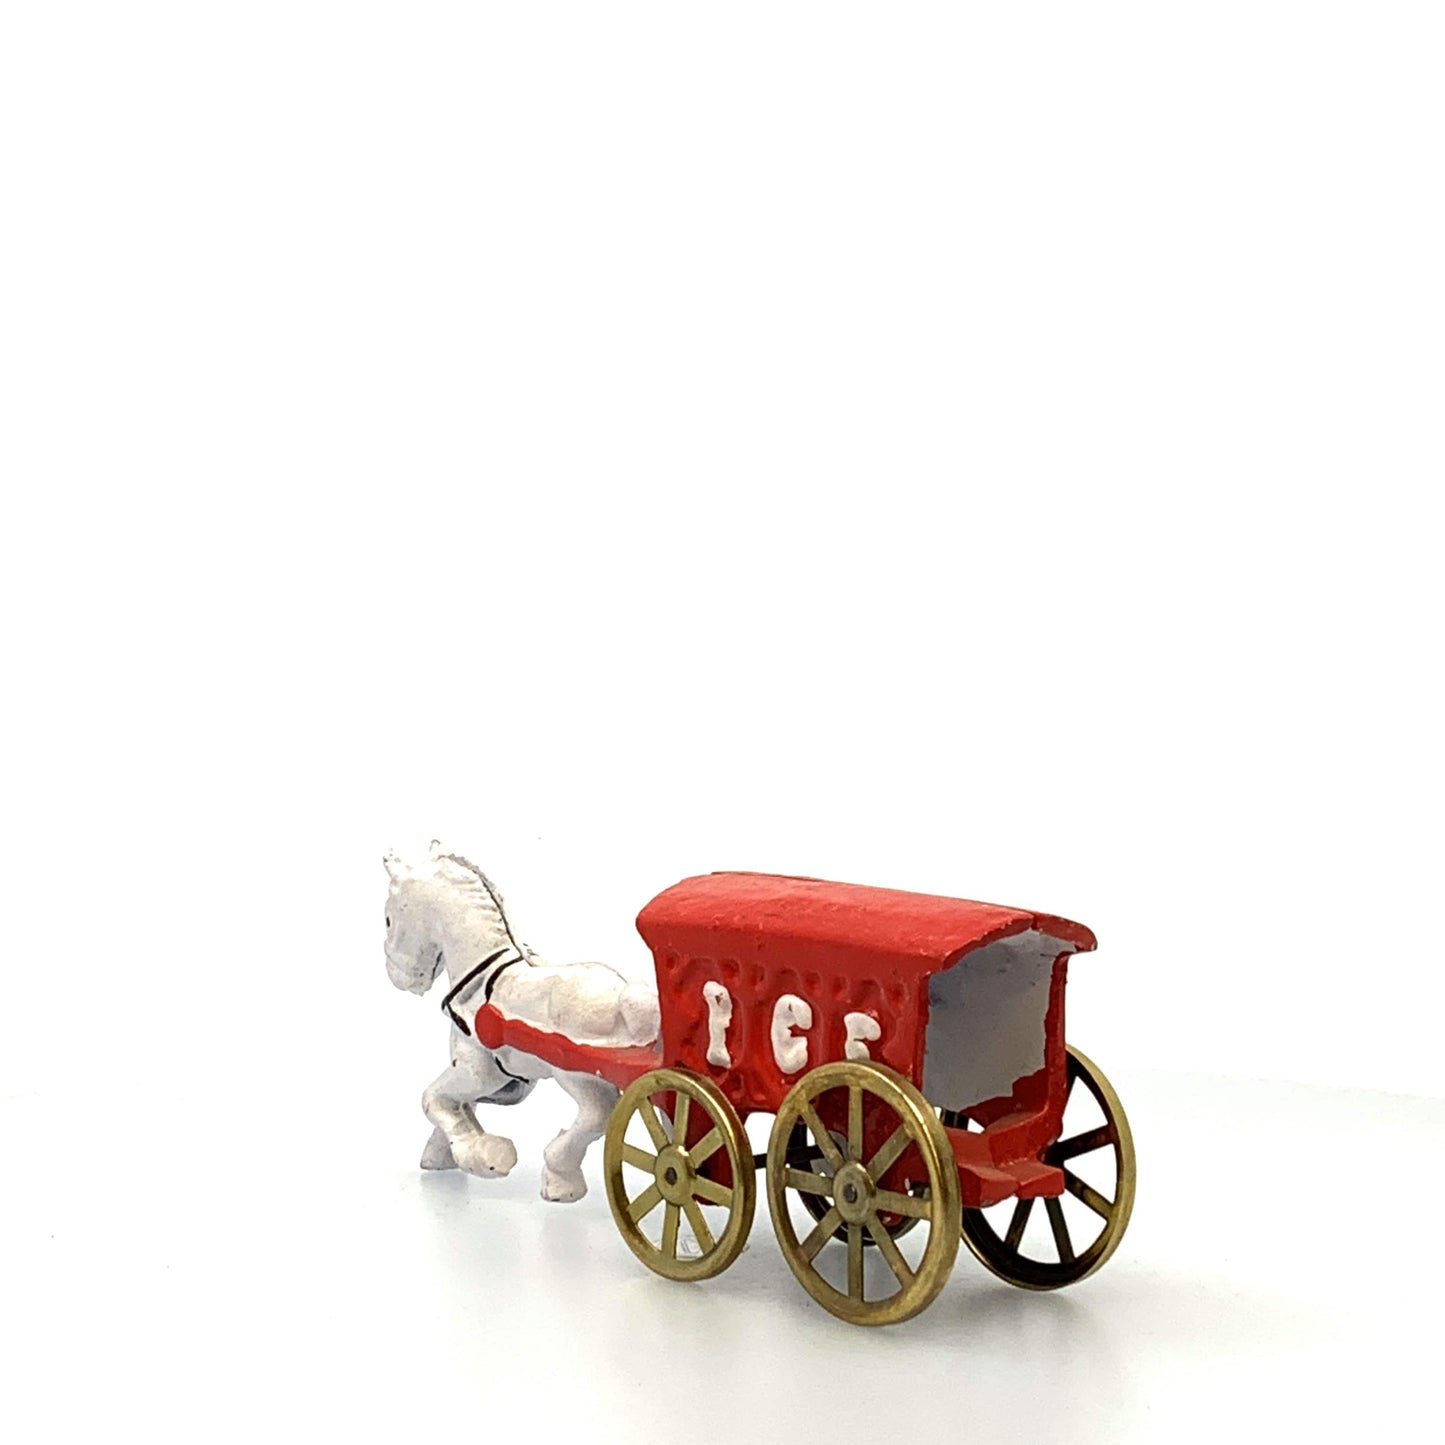 Champion Cast Iron Red Ice Wagon White Horse Drawn Cart Carriage Toy, Gold Wheels